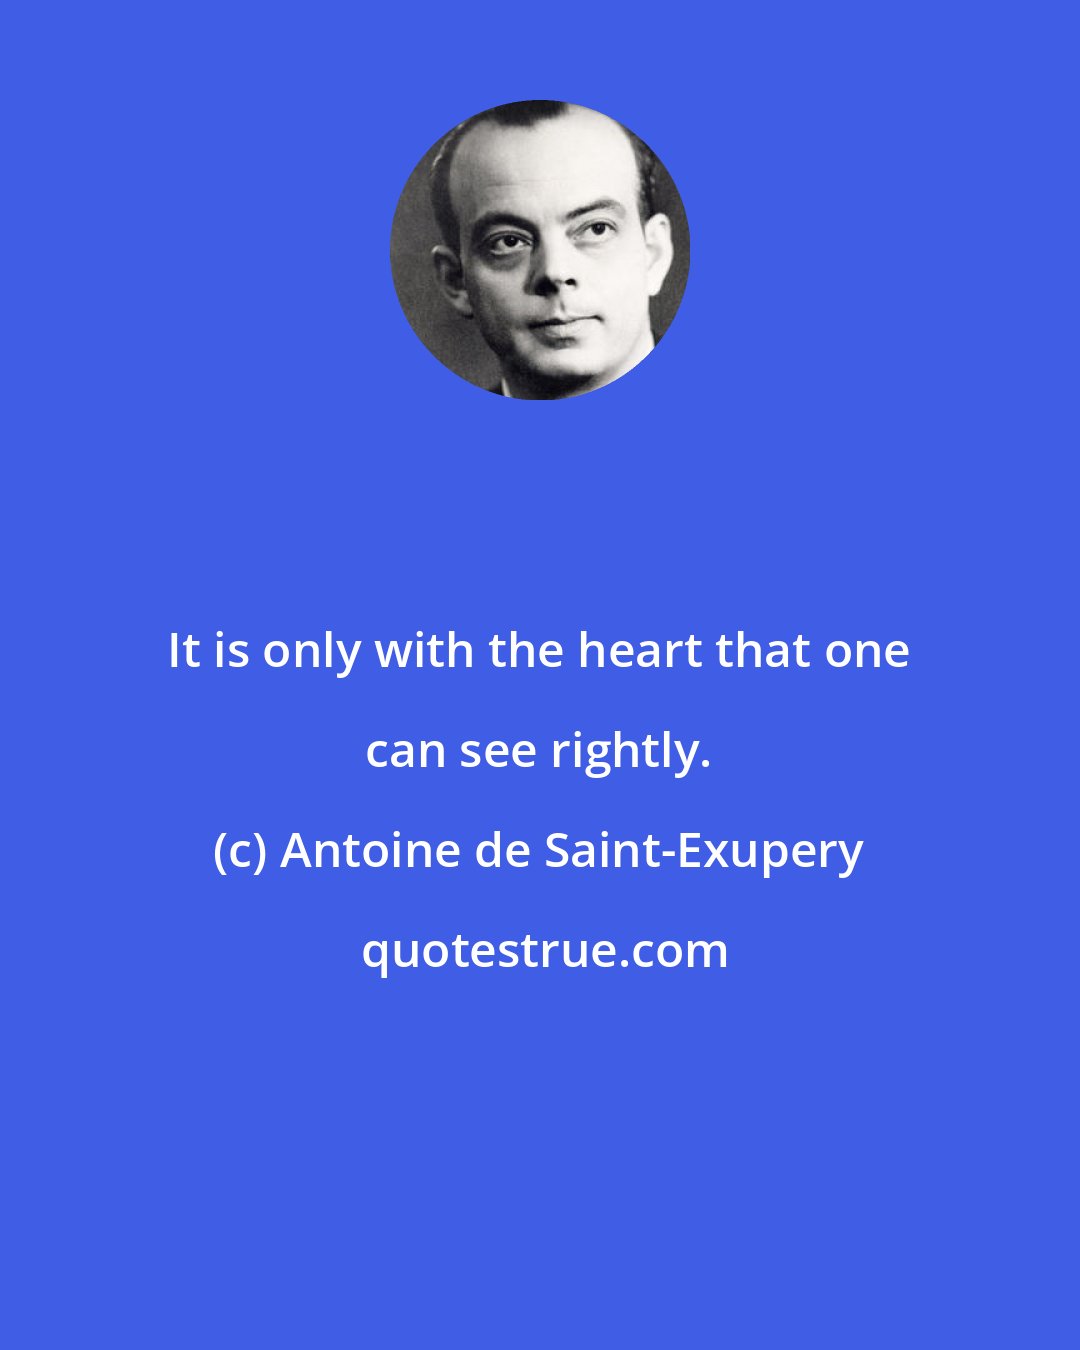 Antoine de Saint-Exupery: It is only with the heart that one can see rightly.